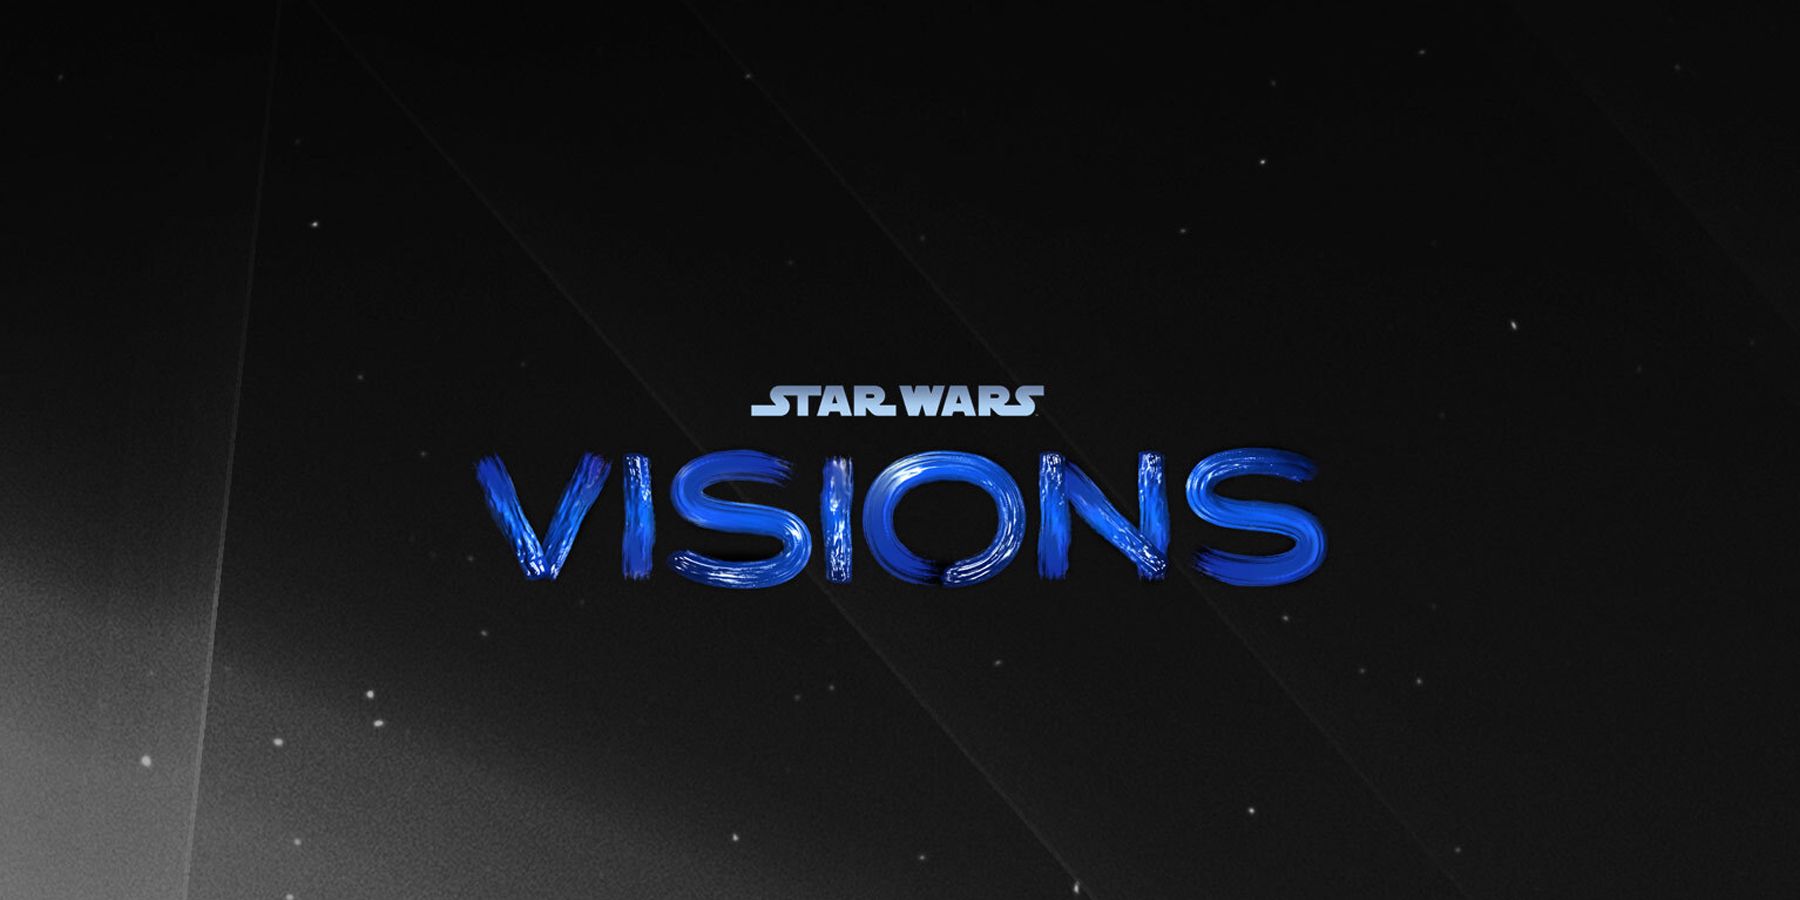 The Star Wars: Visions logo for the franchise's upcoming anime anthology.